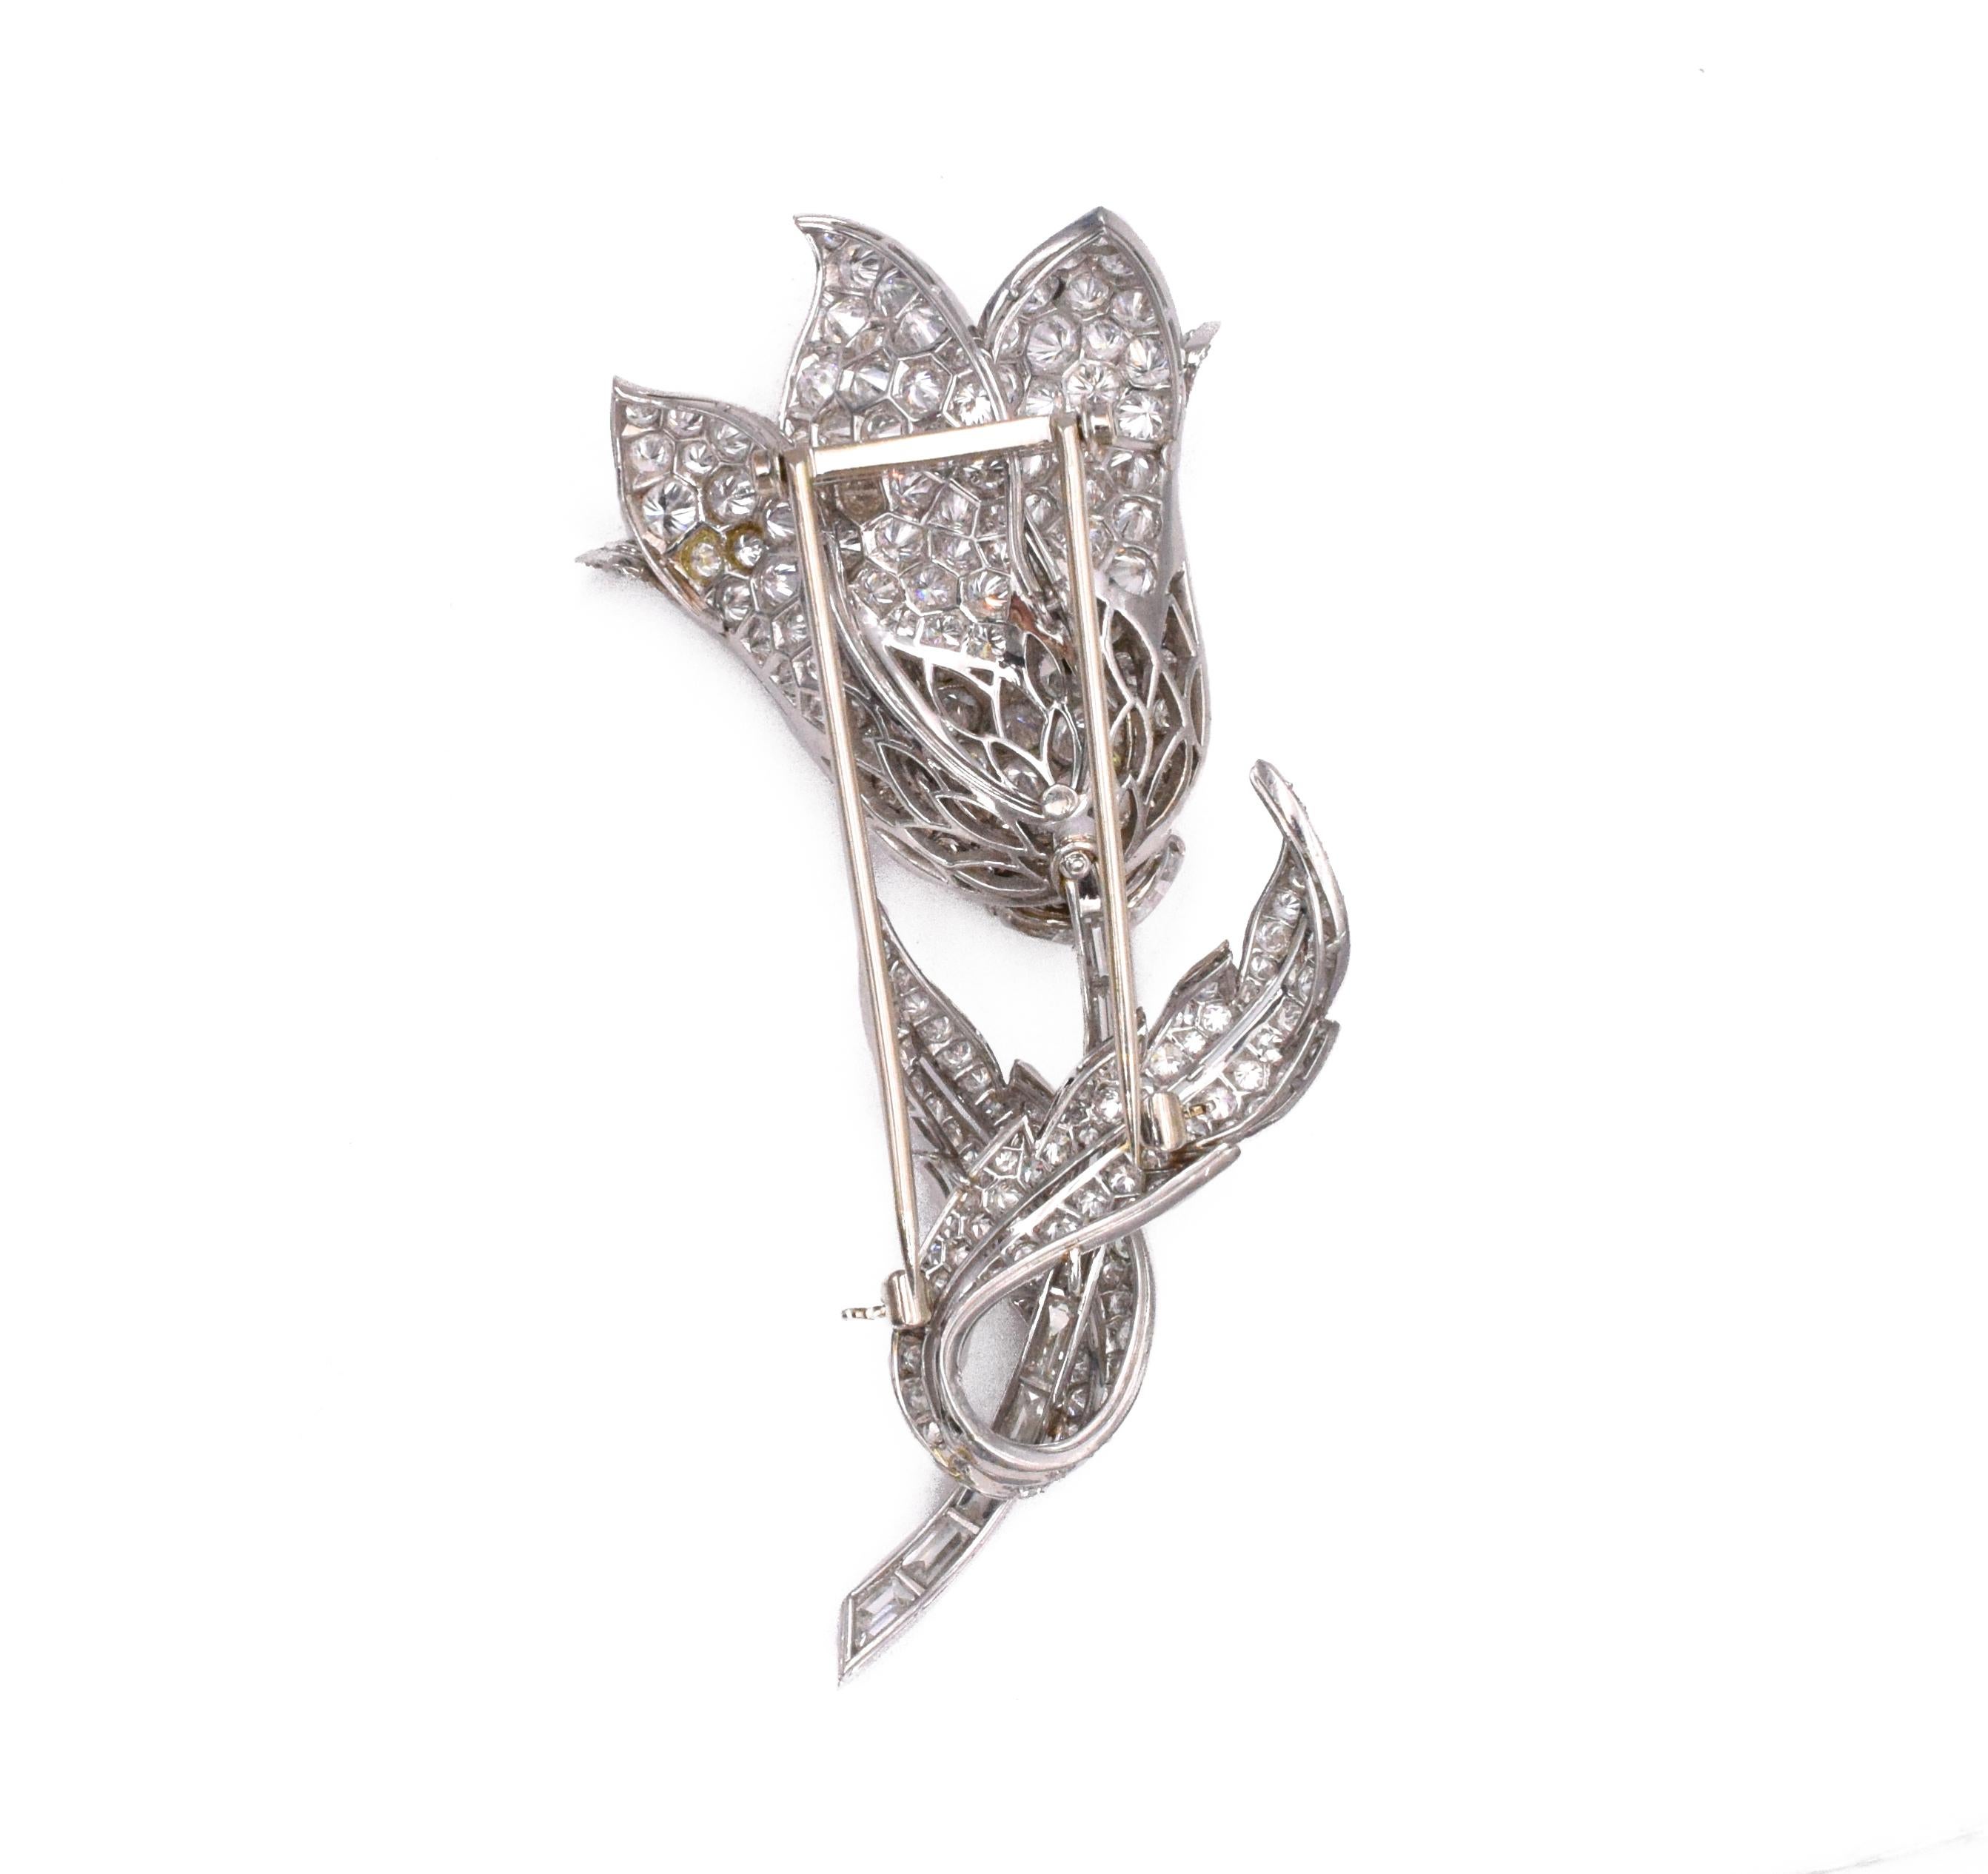 Platinum and Diamond Flower Clip- Brooch The stylized tulip with overlapping petals and leaves pavé-set with round diamonds, completed by a stem of baguette and fancy-shaped diamonds, altogether approximately 17.15 cts.,  
Measuring 3 x 1 3/8 inches.